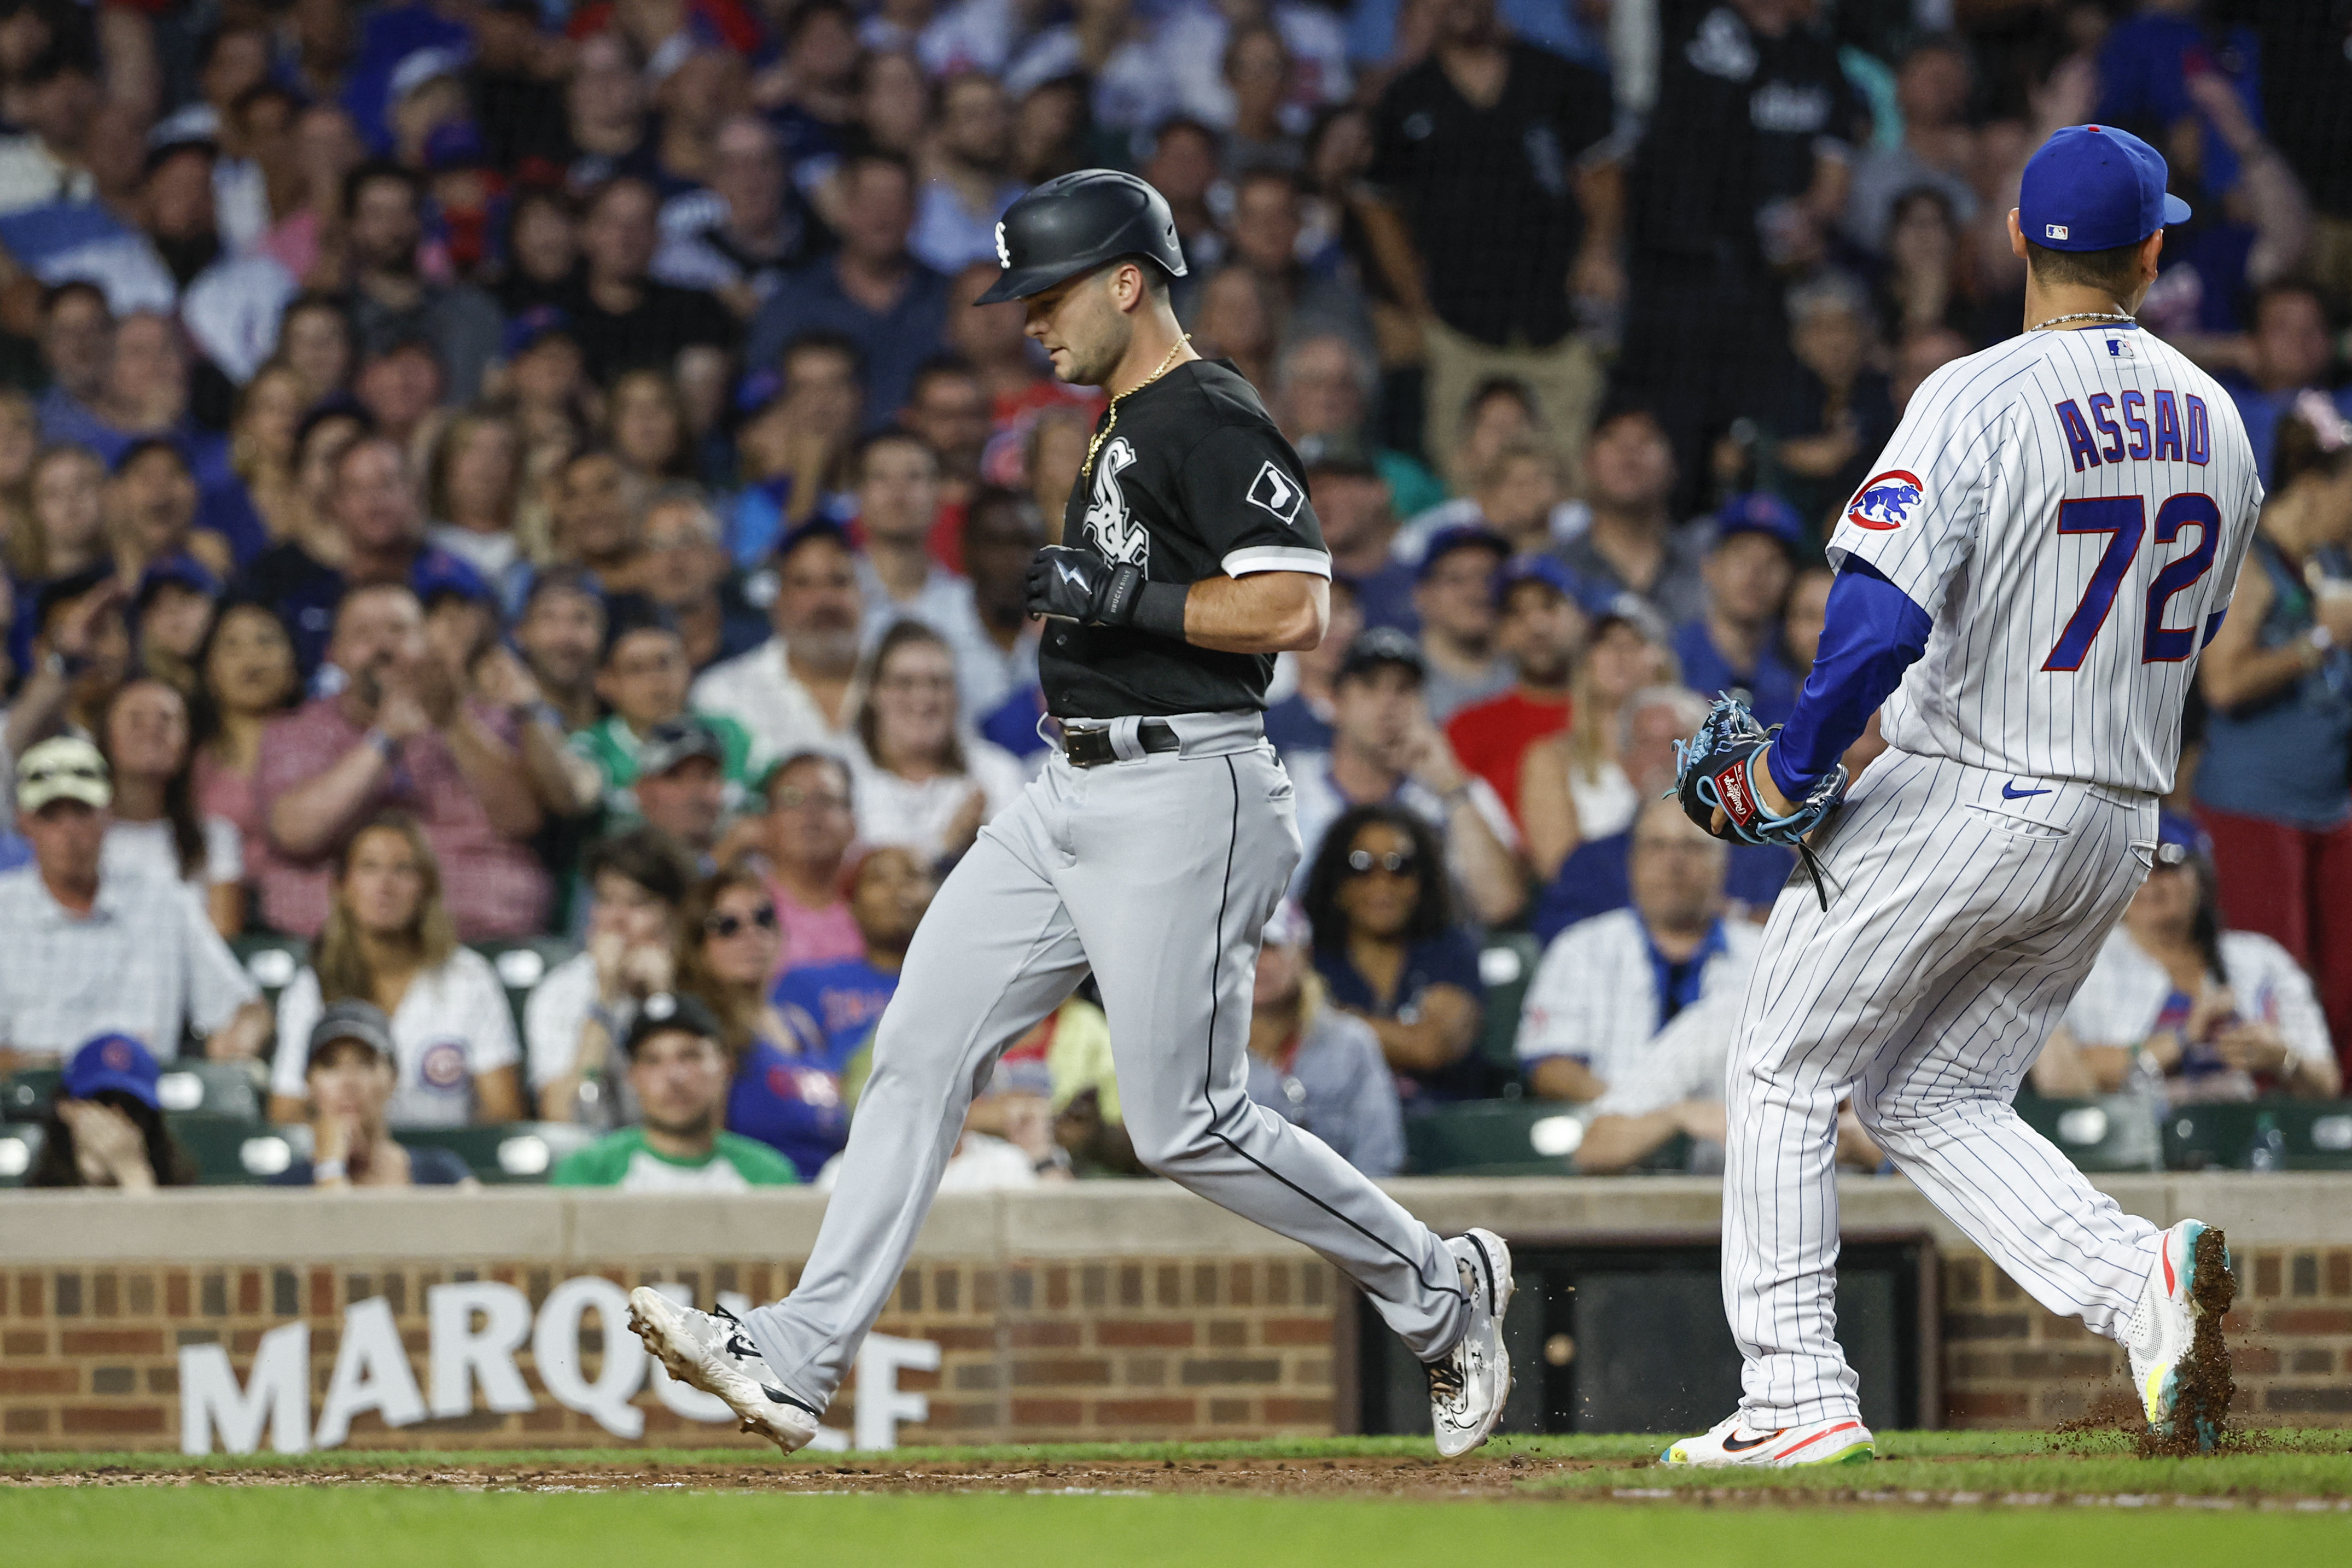 MLB roundup: Walk-off win for White Sox at Field of Dreams